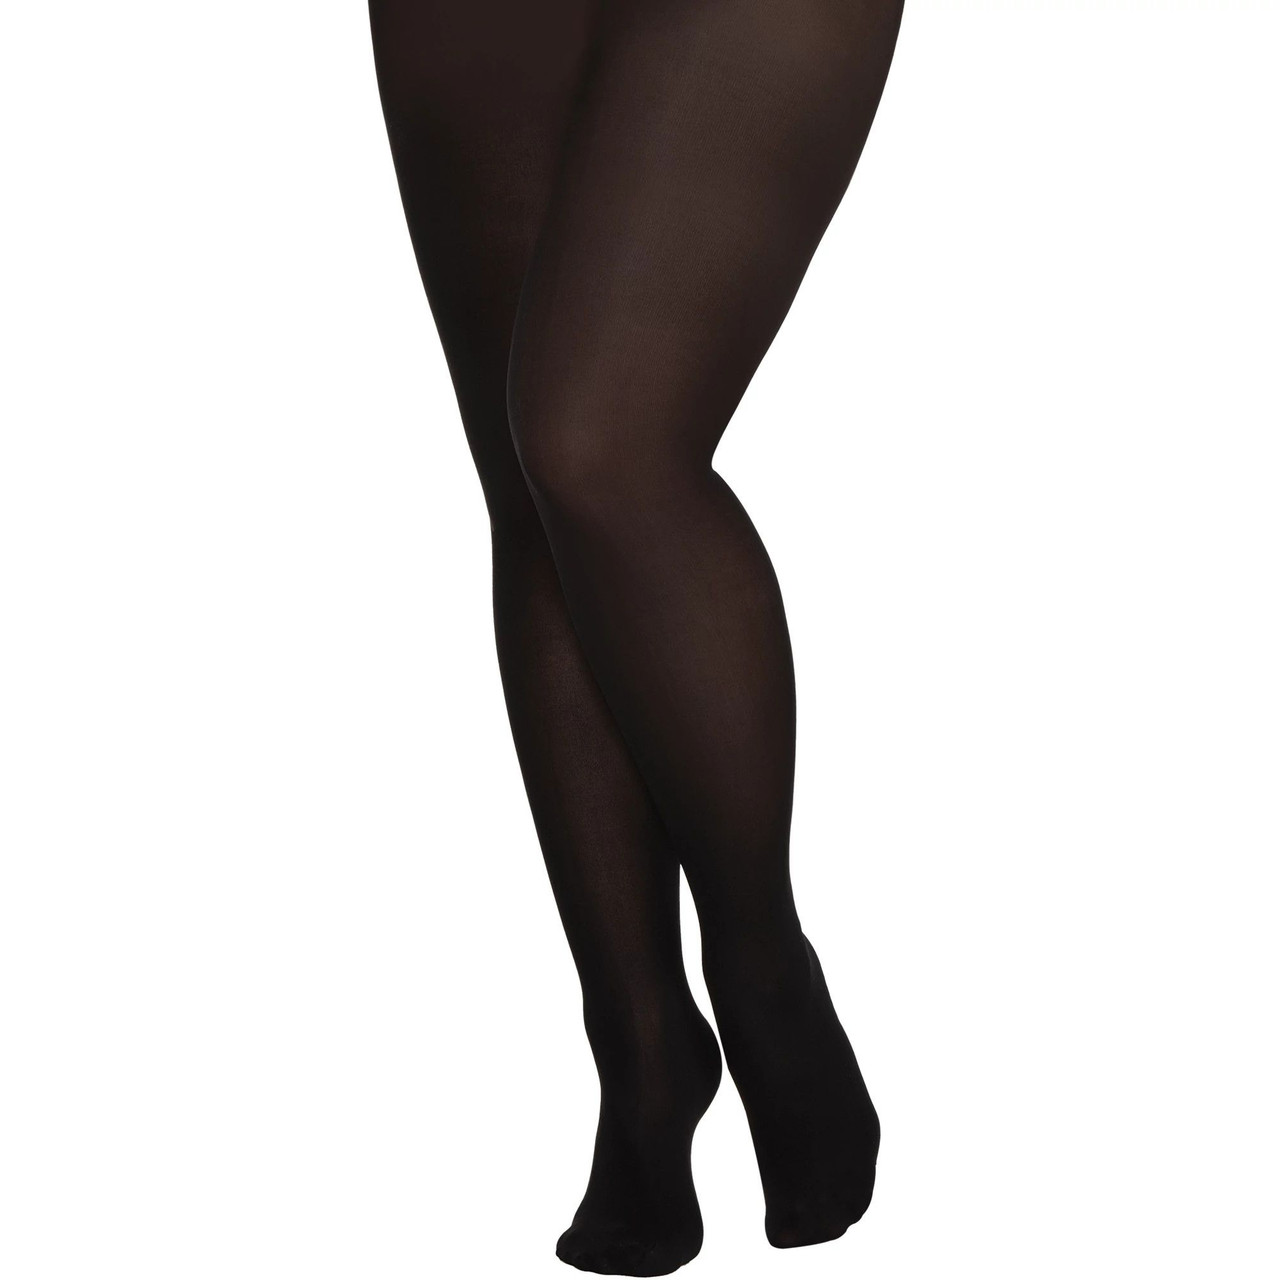 Adult Plus Size Black Tights - Party Time, Inc.